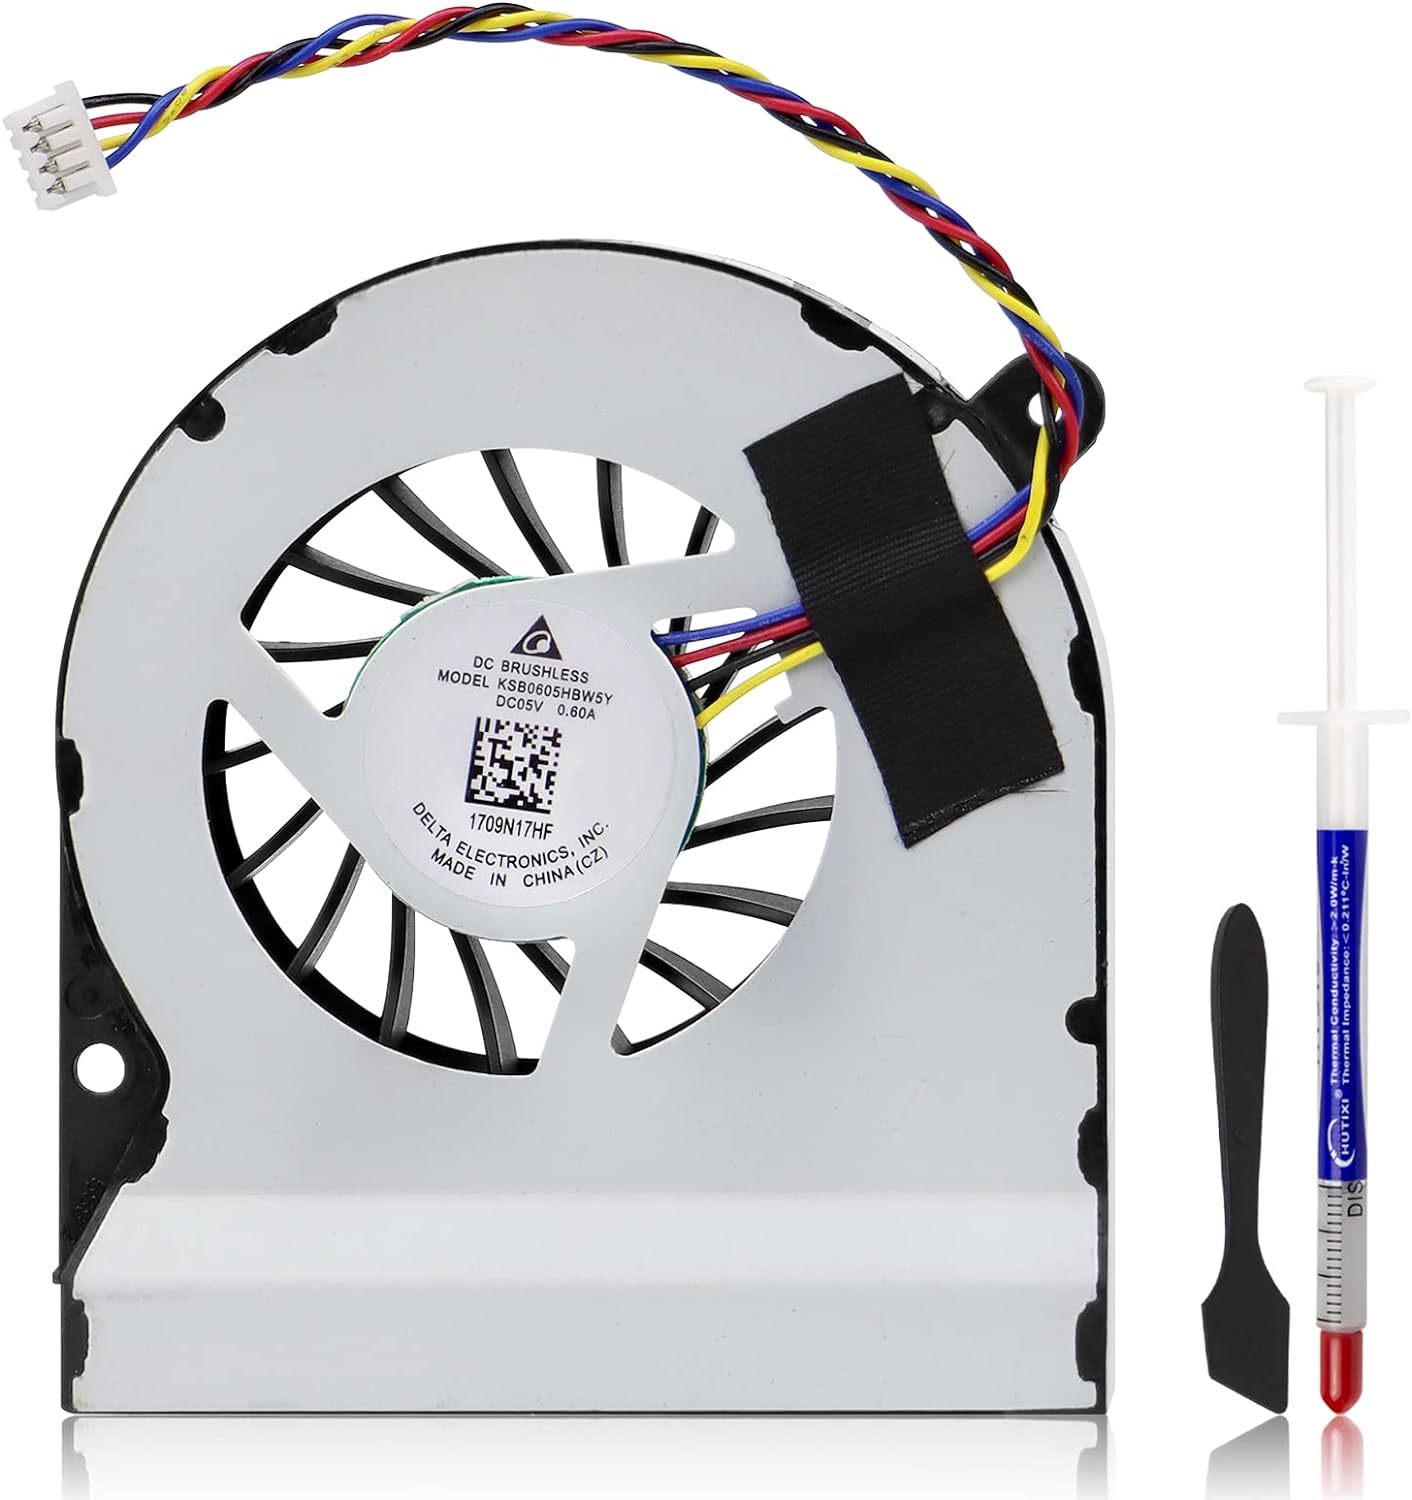 ARLBA CPU Cooling Fan Replacement for Intel NUC Kit Intel NUC 6 NUC6 Intel Fan NUC6i7KYK Kit KSB0605HB 1323-00U9000 5V 0.6A with Repair Tools